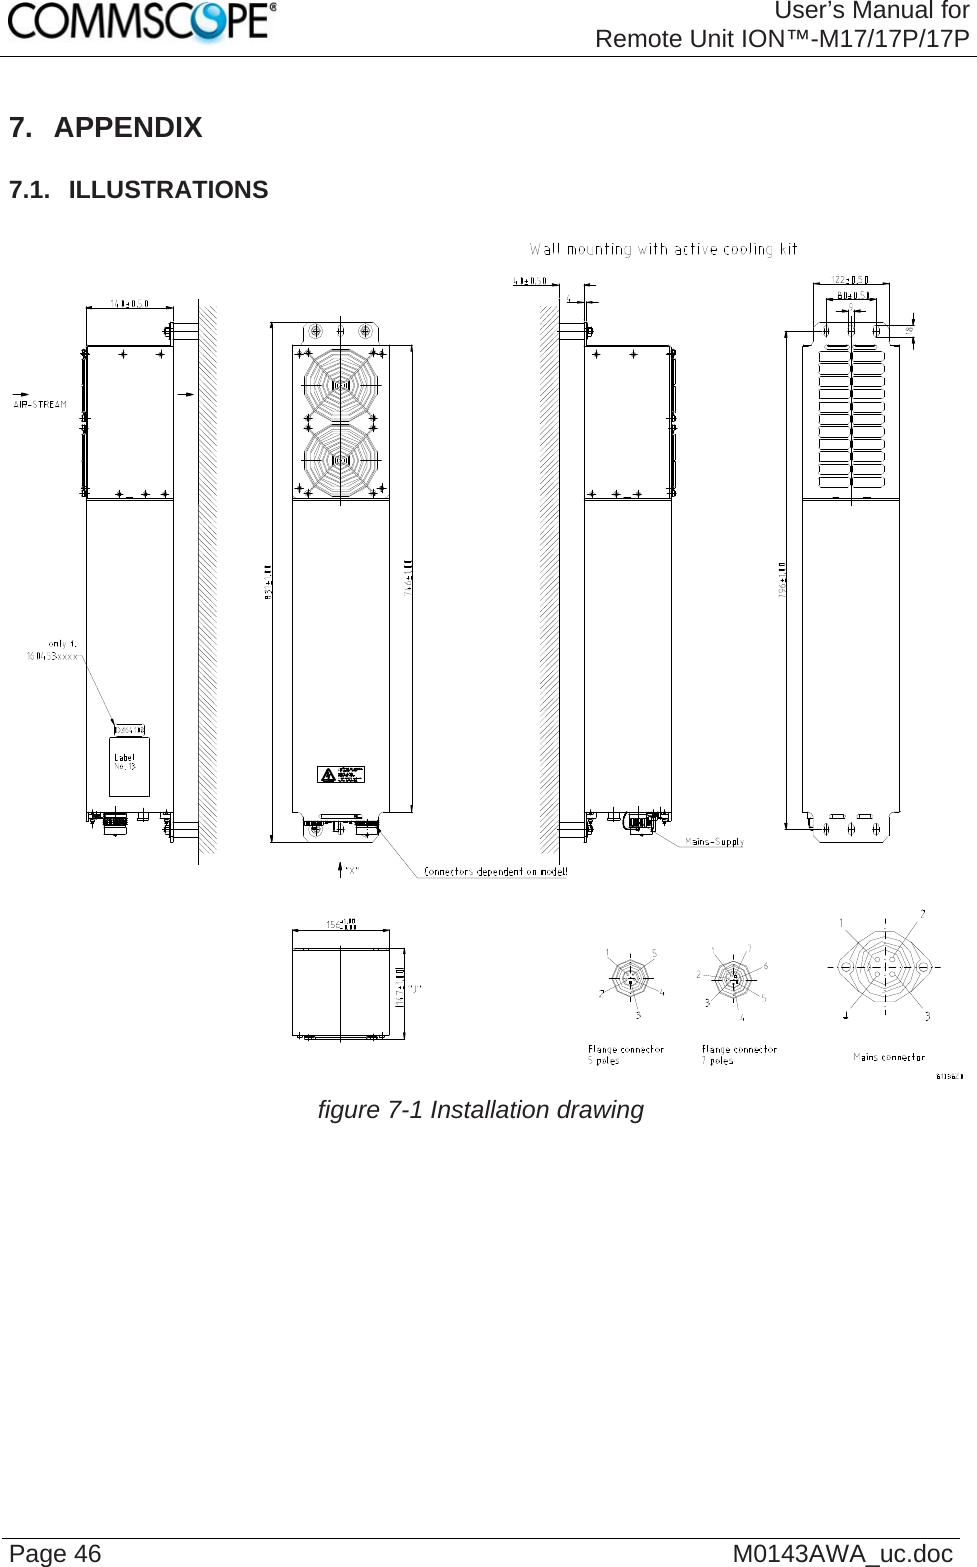 User’s Manual forRemote Unit ION™-M17/17P/17P Page 46  M0143AWA_uc.doc7. APPENDIX 7.1.  ILLUSTRATIONS   figure 7-1 Installation drawing   